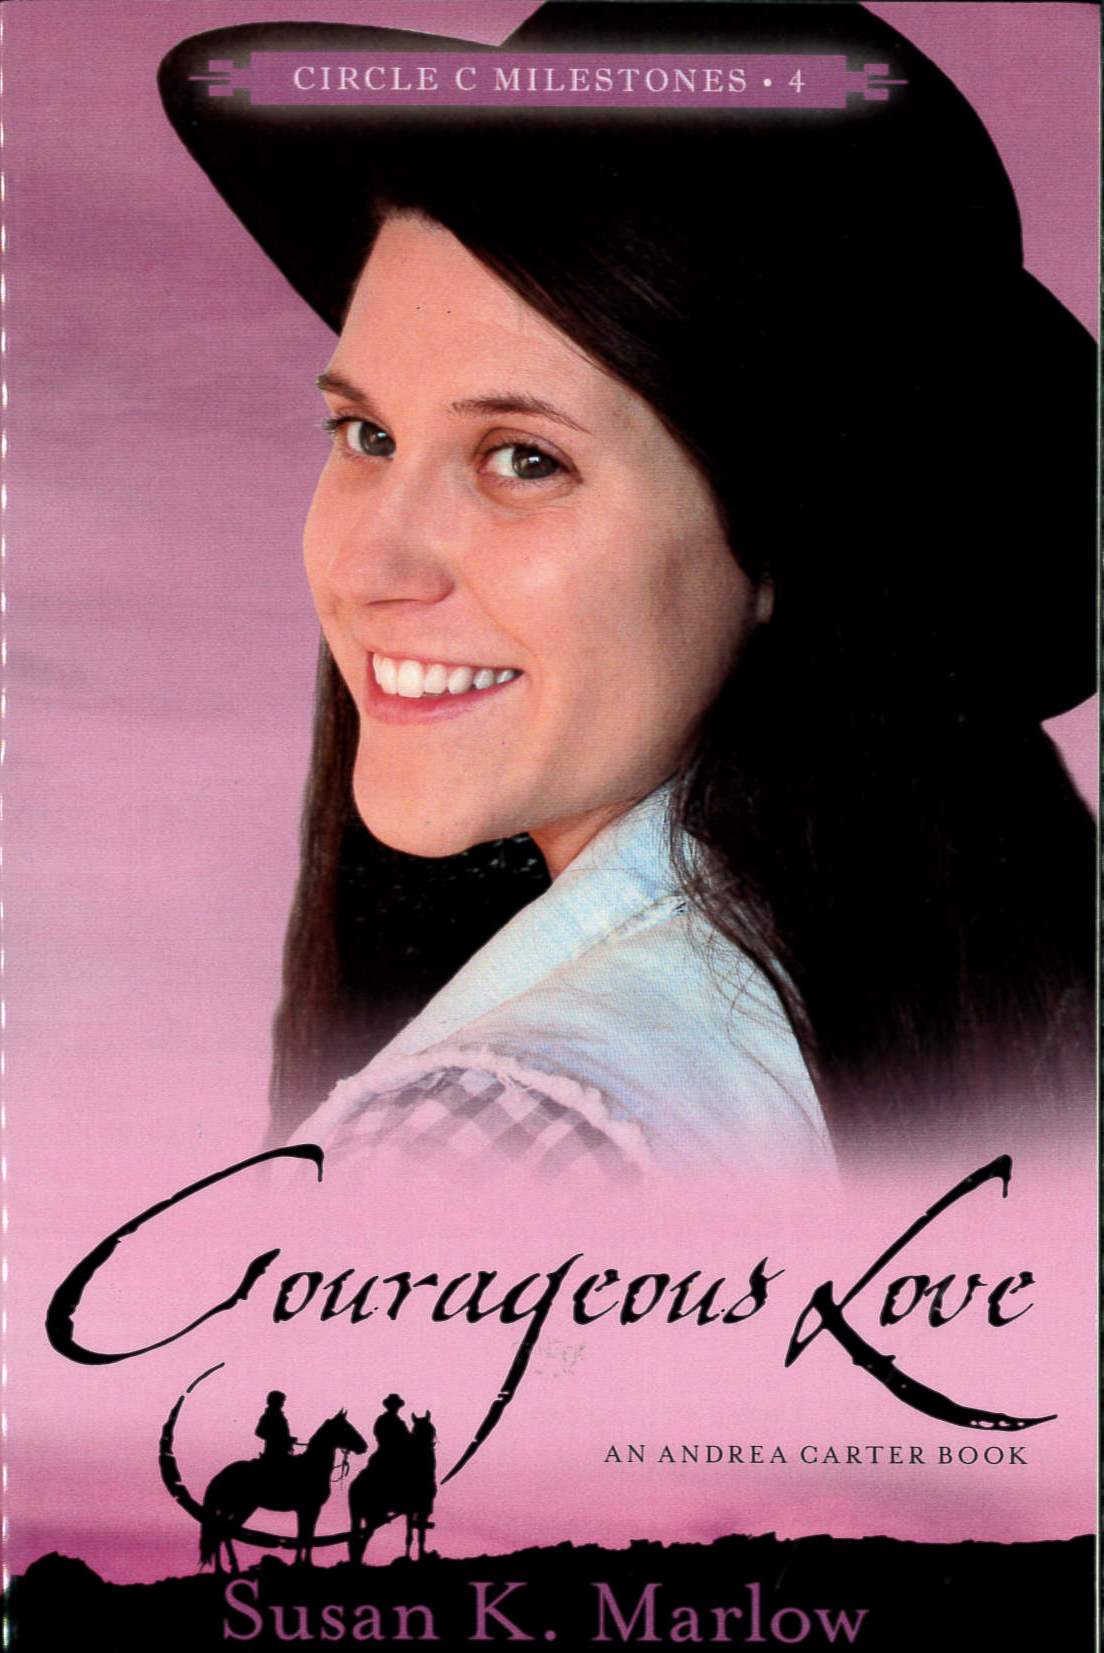 Courageous love /